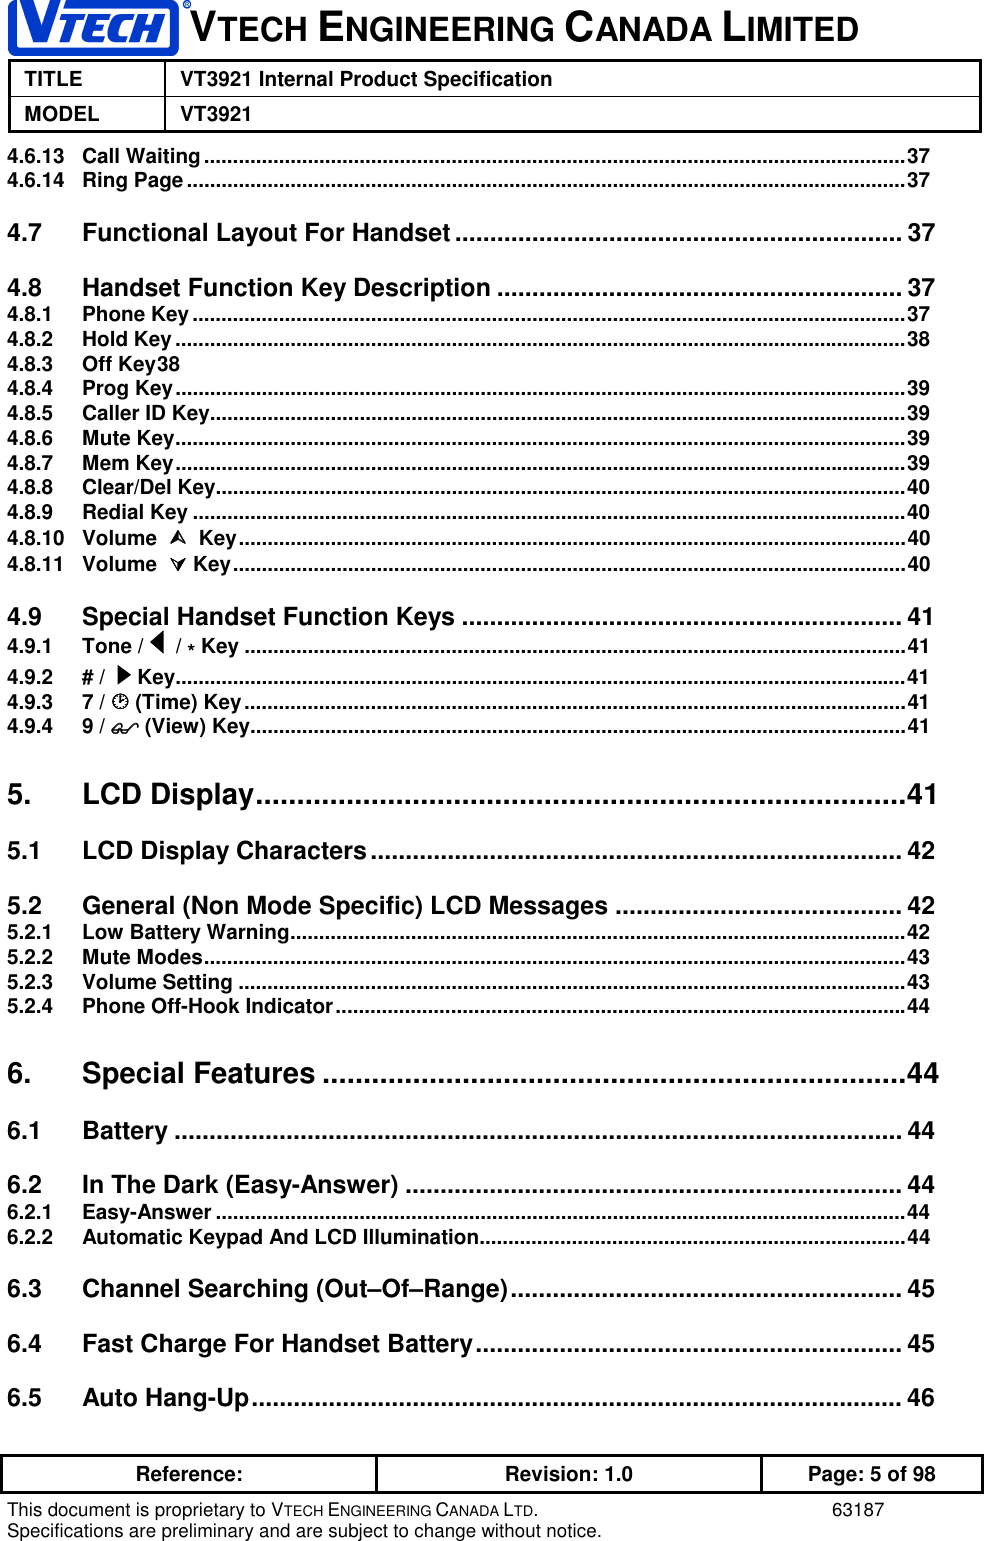 VTECH ENGINEERING CANADA LIMITEDTITLE VT3921 Internal Product SpecificationMODEL VT3921Reference: Revision: 1.0 Page: 5 of 98This document is proprietary to VTECH ENGINEERING CANADA LTD. 63187Specifications are preliminary and are subject to change without notice.4.6.13 Call Waiting..........................................................................................................................374.6.14 Ring Page.............................................................................................................................374.7 Functional Layout For Handset ................................................................ 374.8 Handset Function Key Description .......................................................... 374.8.1 Phone Key............................................................................................................................374.8.2 Hold Key...............................................................................................................................384.8.3 Off Key384.8.4 Prog Key...............................................................................................................................394.8.5 Caller ID Key.........................................................................................................................394.8.6 Mute Key...............................................................................................................................394.8.7 Mem Key...............................................................................................................................394.8.8 Clear/Del Key........................................................................................................................404.8.9 Redial Key ............................................................................................................................404.8.10 Volume       Key....................................................................................................................404.8.11 Volume      Key.....................................................................................................................404.9 Special Handset Function Keys ............................................................... 414.9.1 Tone /    / * Key ...................................................................................................................414.9.2 # /    Key...............................................................................................................................414.9.3 7 /  (Time) Key...................................................................................................................414.9.4 9 /  (View) Key..................................................................................................................415. LCD Display...............................................................................415.1 LCD Display Characters............................................................................ 425.2 General (Non Mode Specific) LCD Messages ......................................... 425.2.1 Low Battery Warning...........................................................................................................425.2.2 Mute Modes..........................................................................................................................435.2.3 Volume Setting ....................................................................................................................435.2.4 Phone Off-Hook Indicator...................................................................................................446. Special Features .......................................................................446.1 Battery ........................................................................................................ 446.2 In The Dark (Easy-Answer) ....................................................................... 446.2.1 Easy-Answer ........................................................................................................................446.2.2 Automatic Keypad And LCD Illumination..........................................................................446.3 Channel Searching (Out–Of–Range)........................................................ 456.4 Fast Charge For Handset Battery............................................................. 456.5 Auto Hang-Up............................................................................................. 46